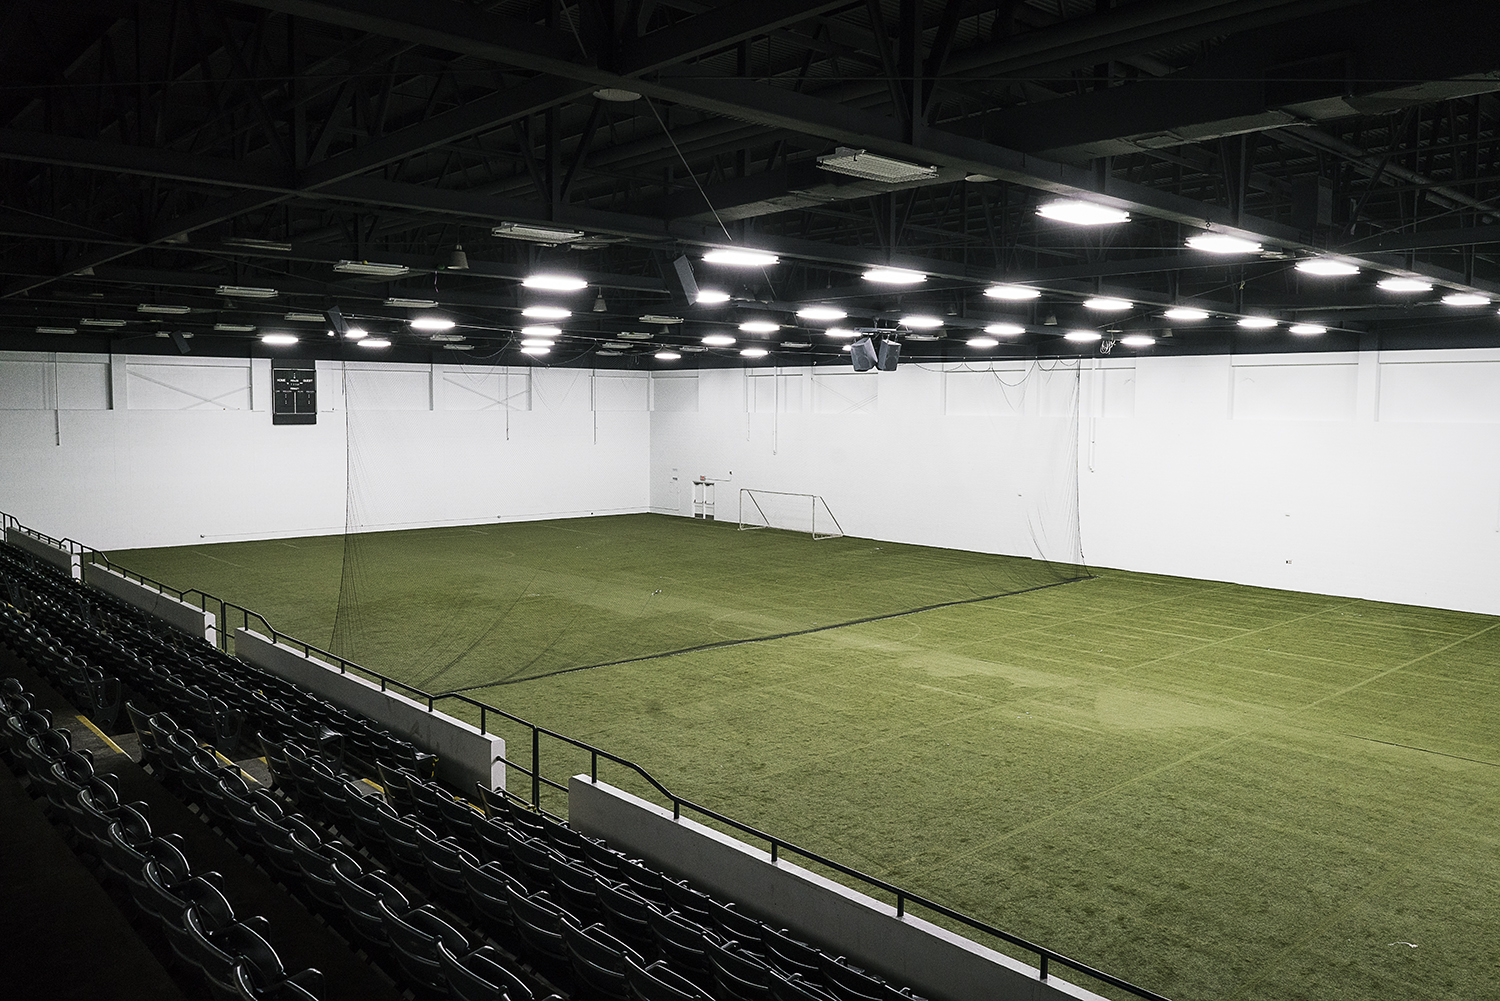 Flint, MI - Tuesday, January 30, 2018: A spectator view of the 30,000 square foot field and second arena at the Dort Federal Event Center.